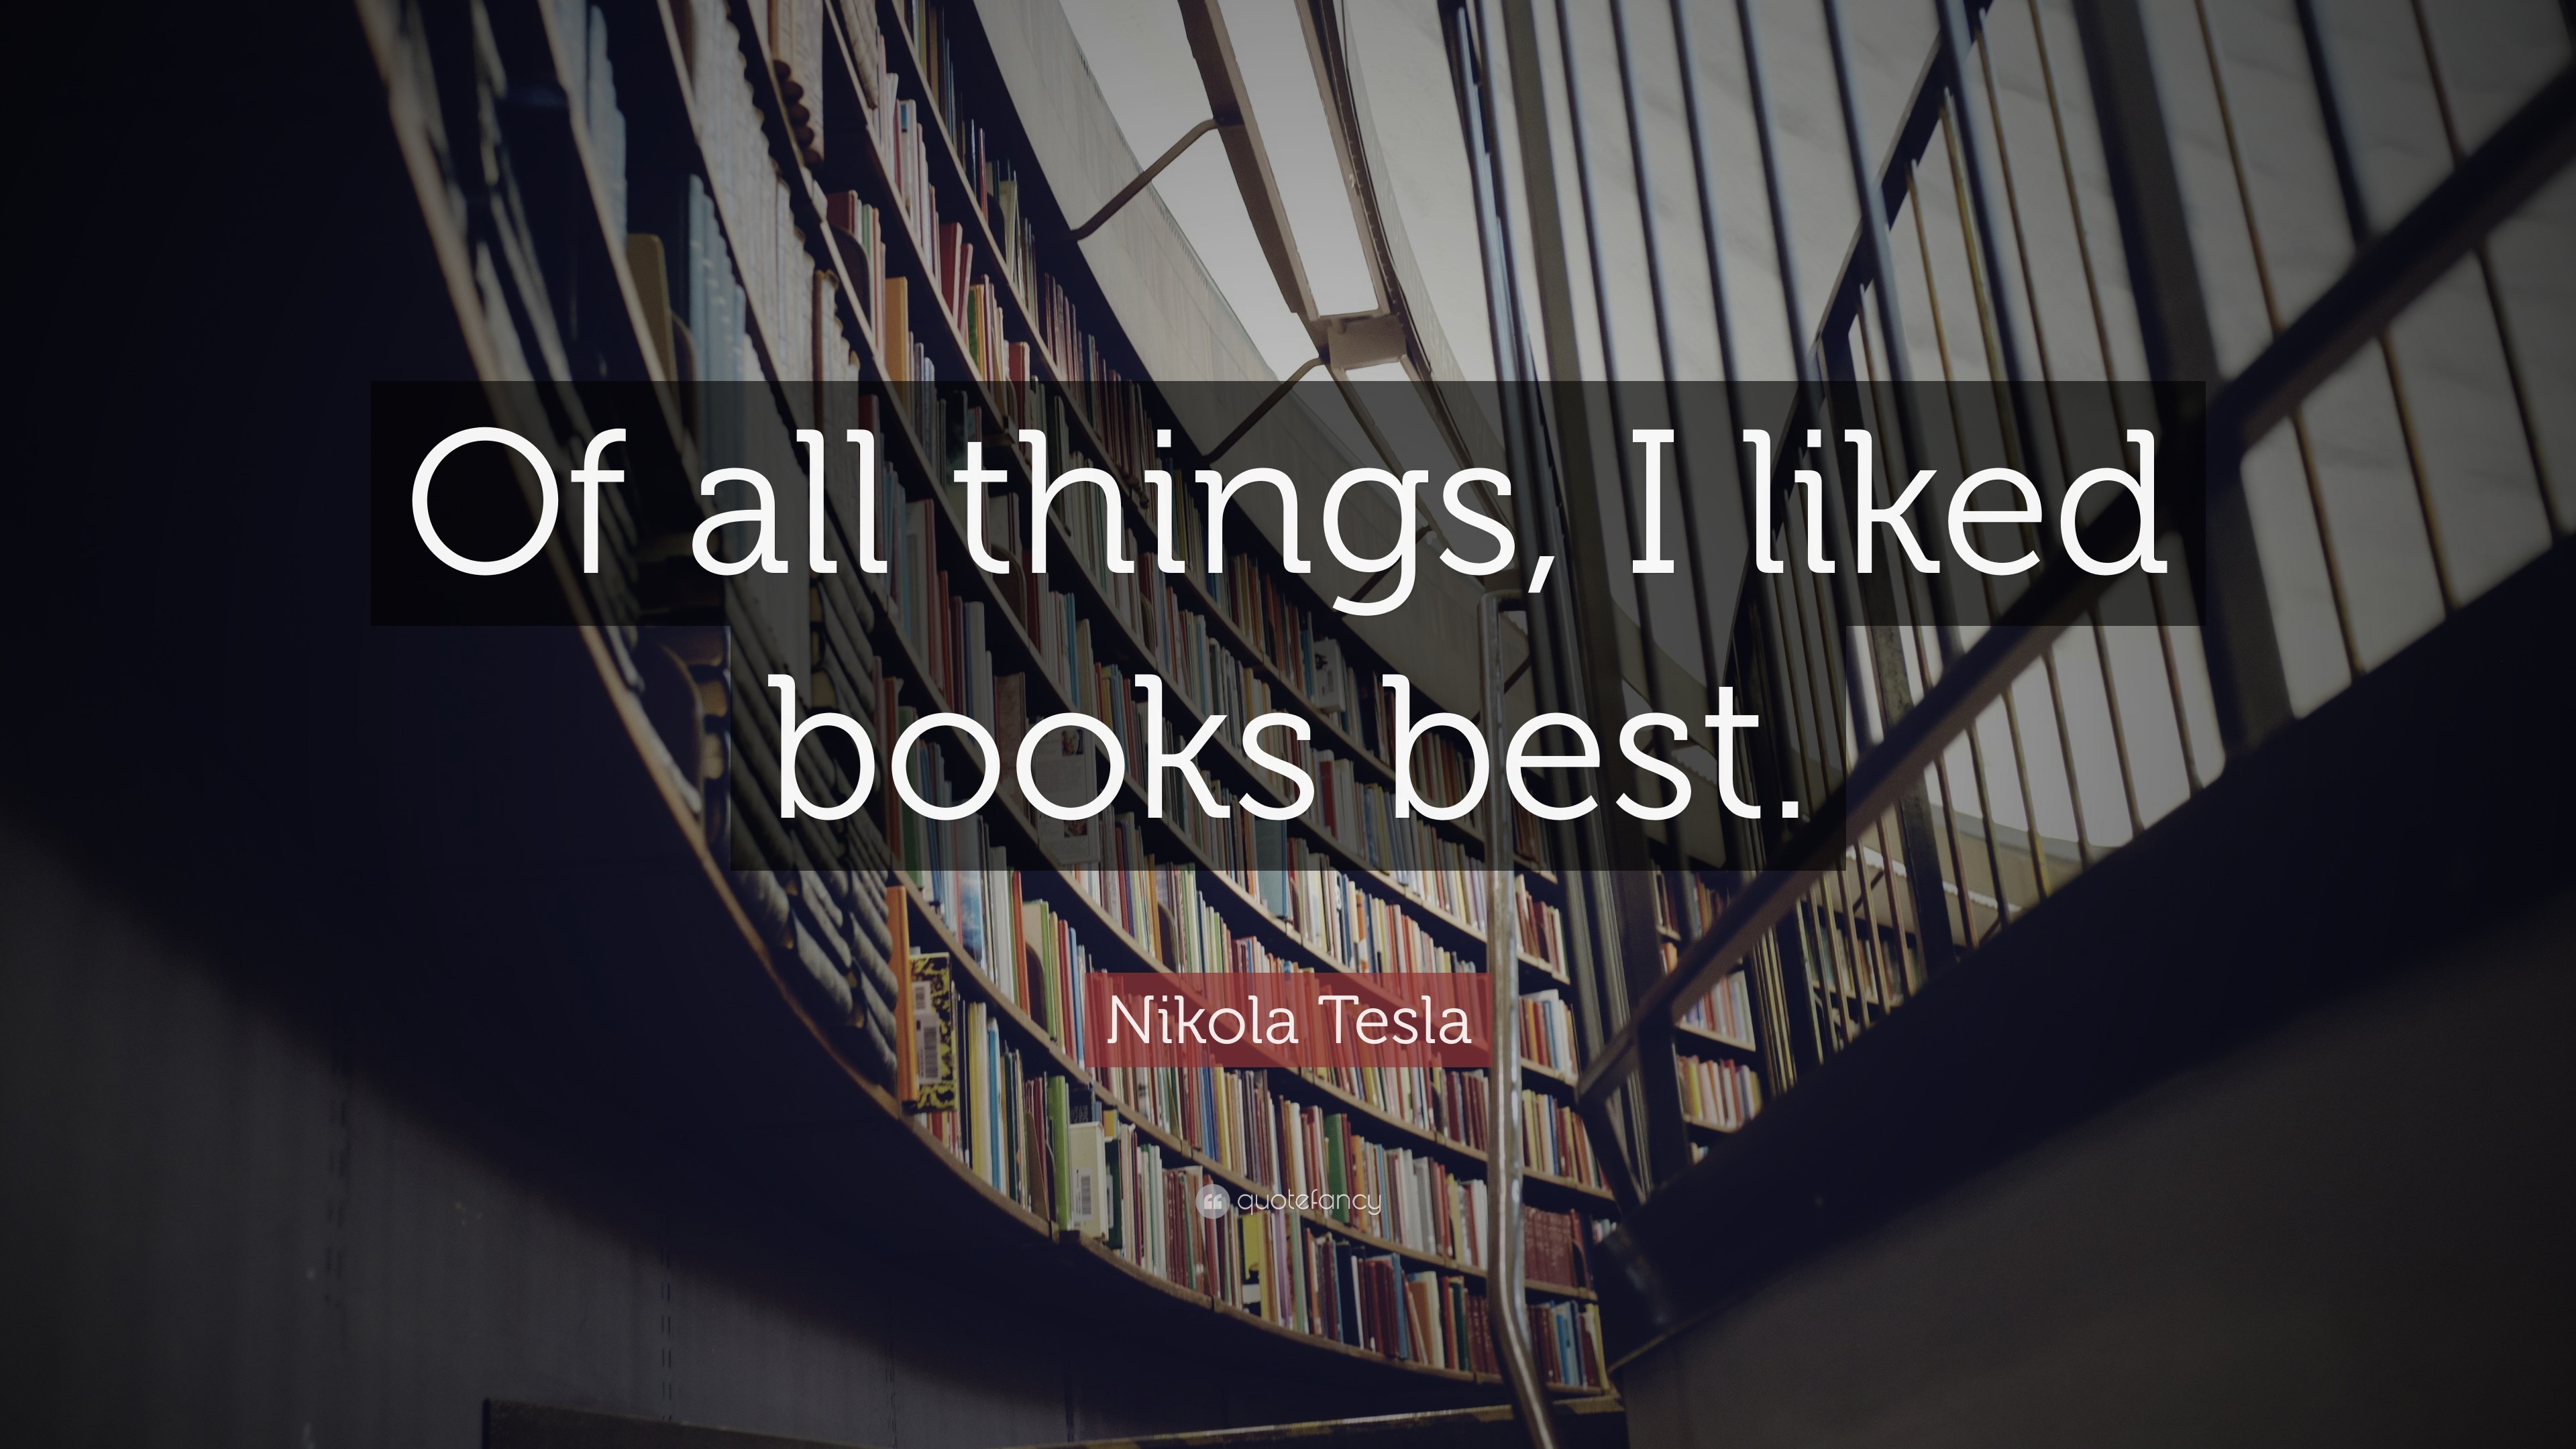 Nikola Tesla Quote Of all things, I liked books best.